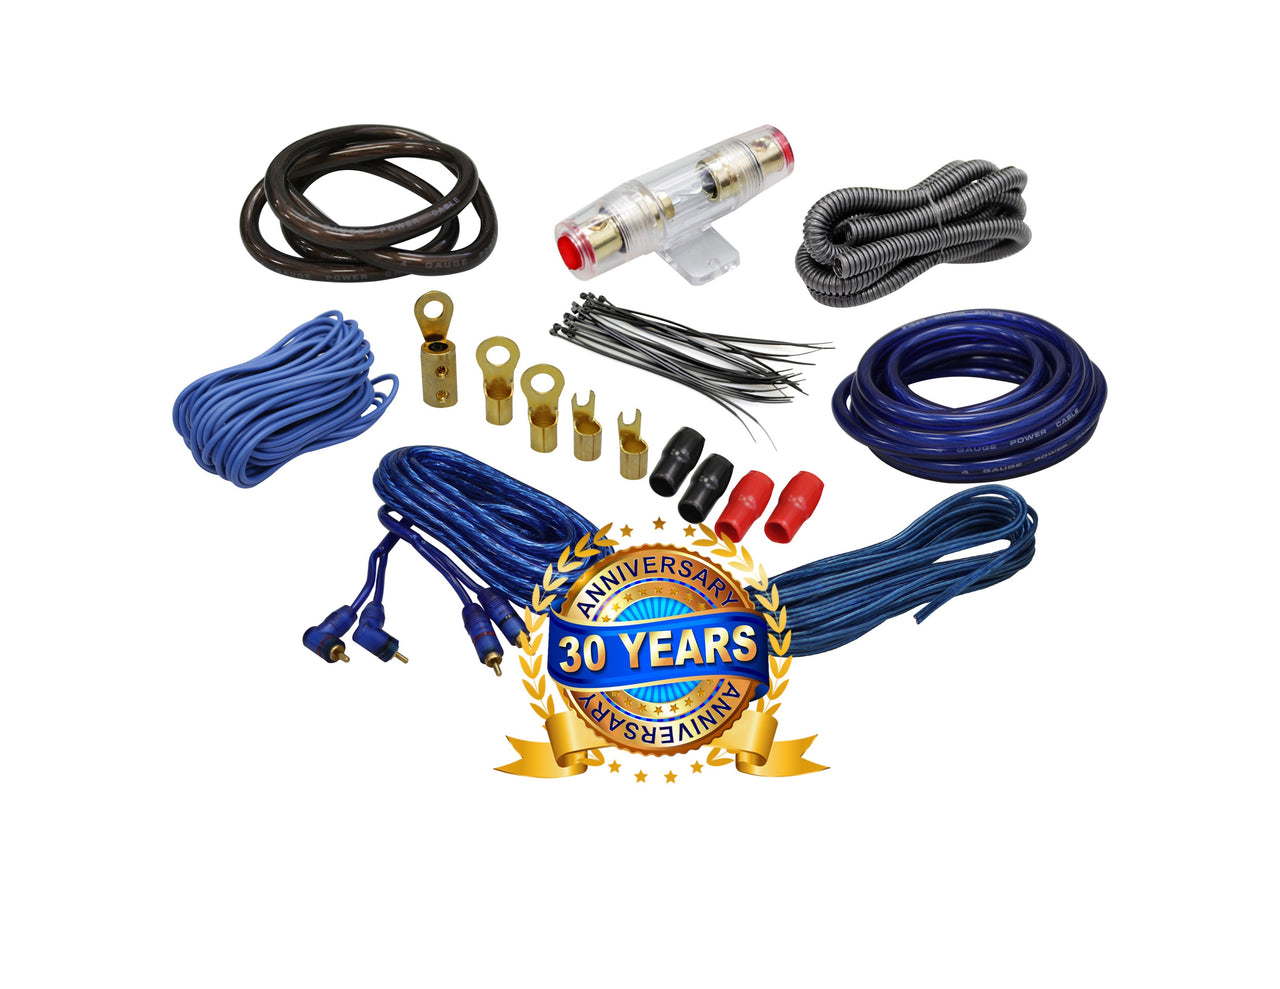 SX 4 Gauge Amp Kit Amplifier Install Wiring Complete 4 Ga Car Wires Blue 2000W